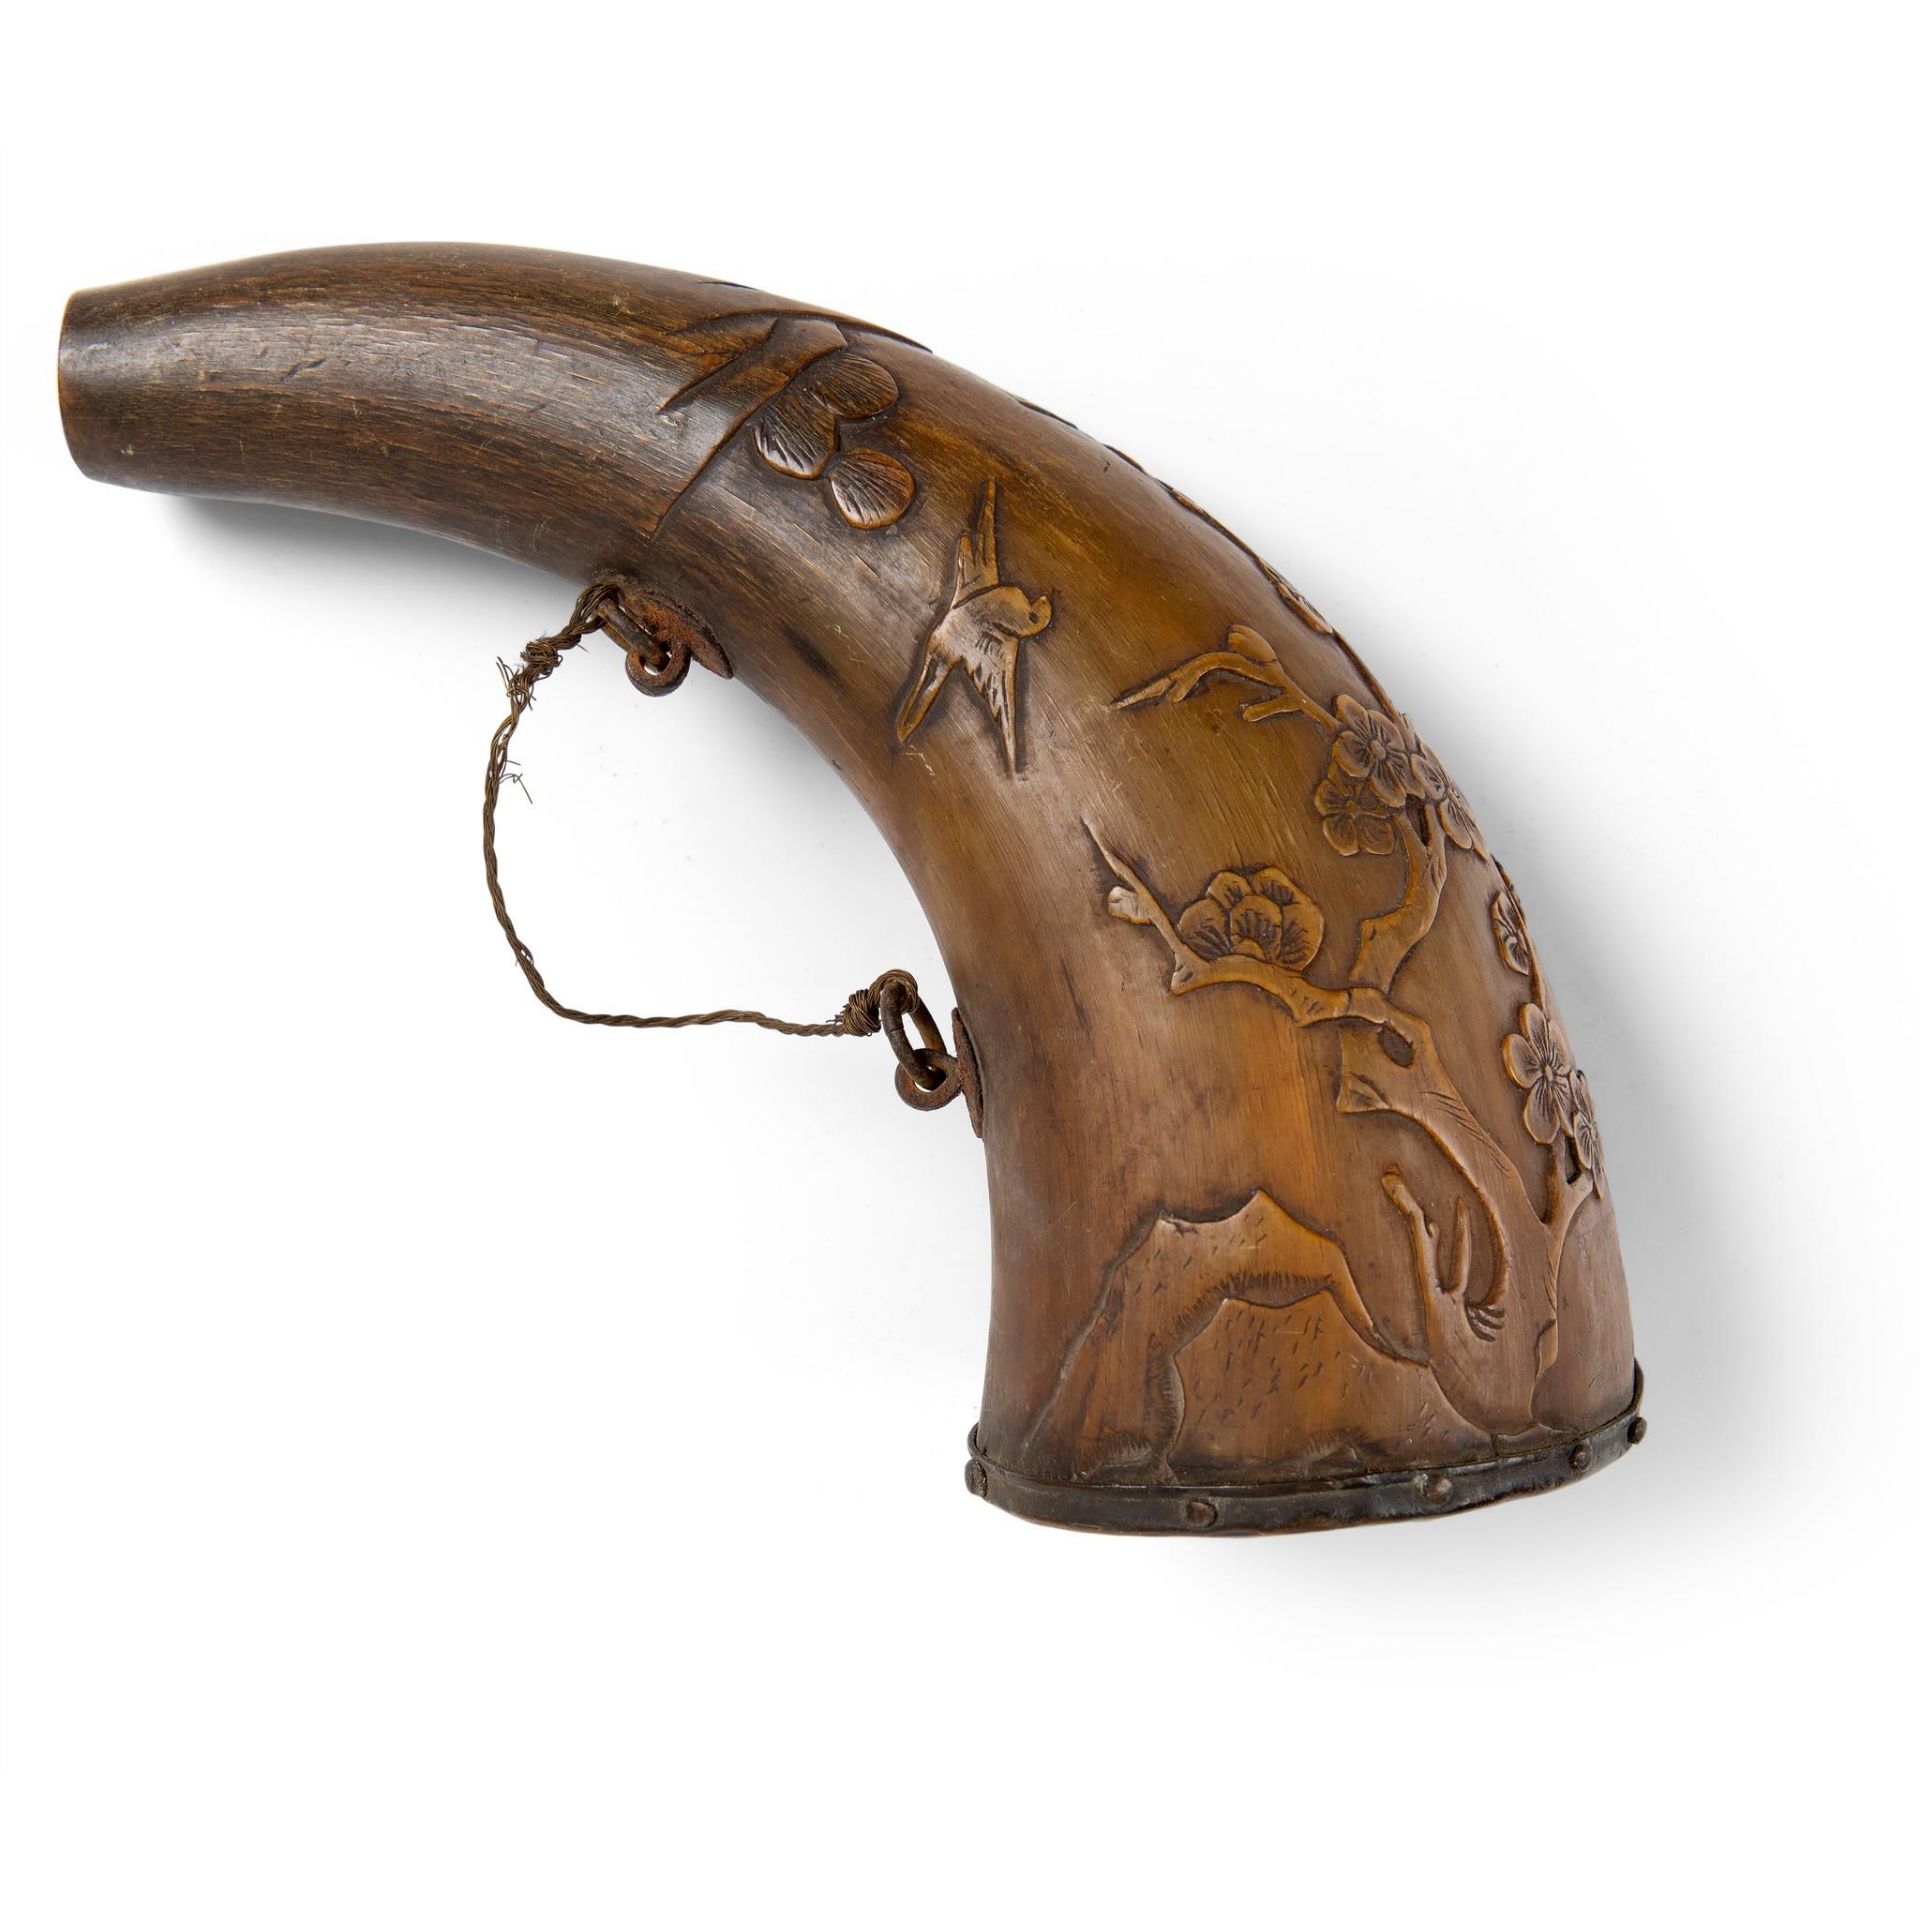 UNUSUAL 'POETRY' BUFFALO HORN WINE CONTAINER QING DYNASTY, 19TH CENTURY